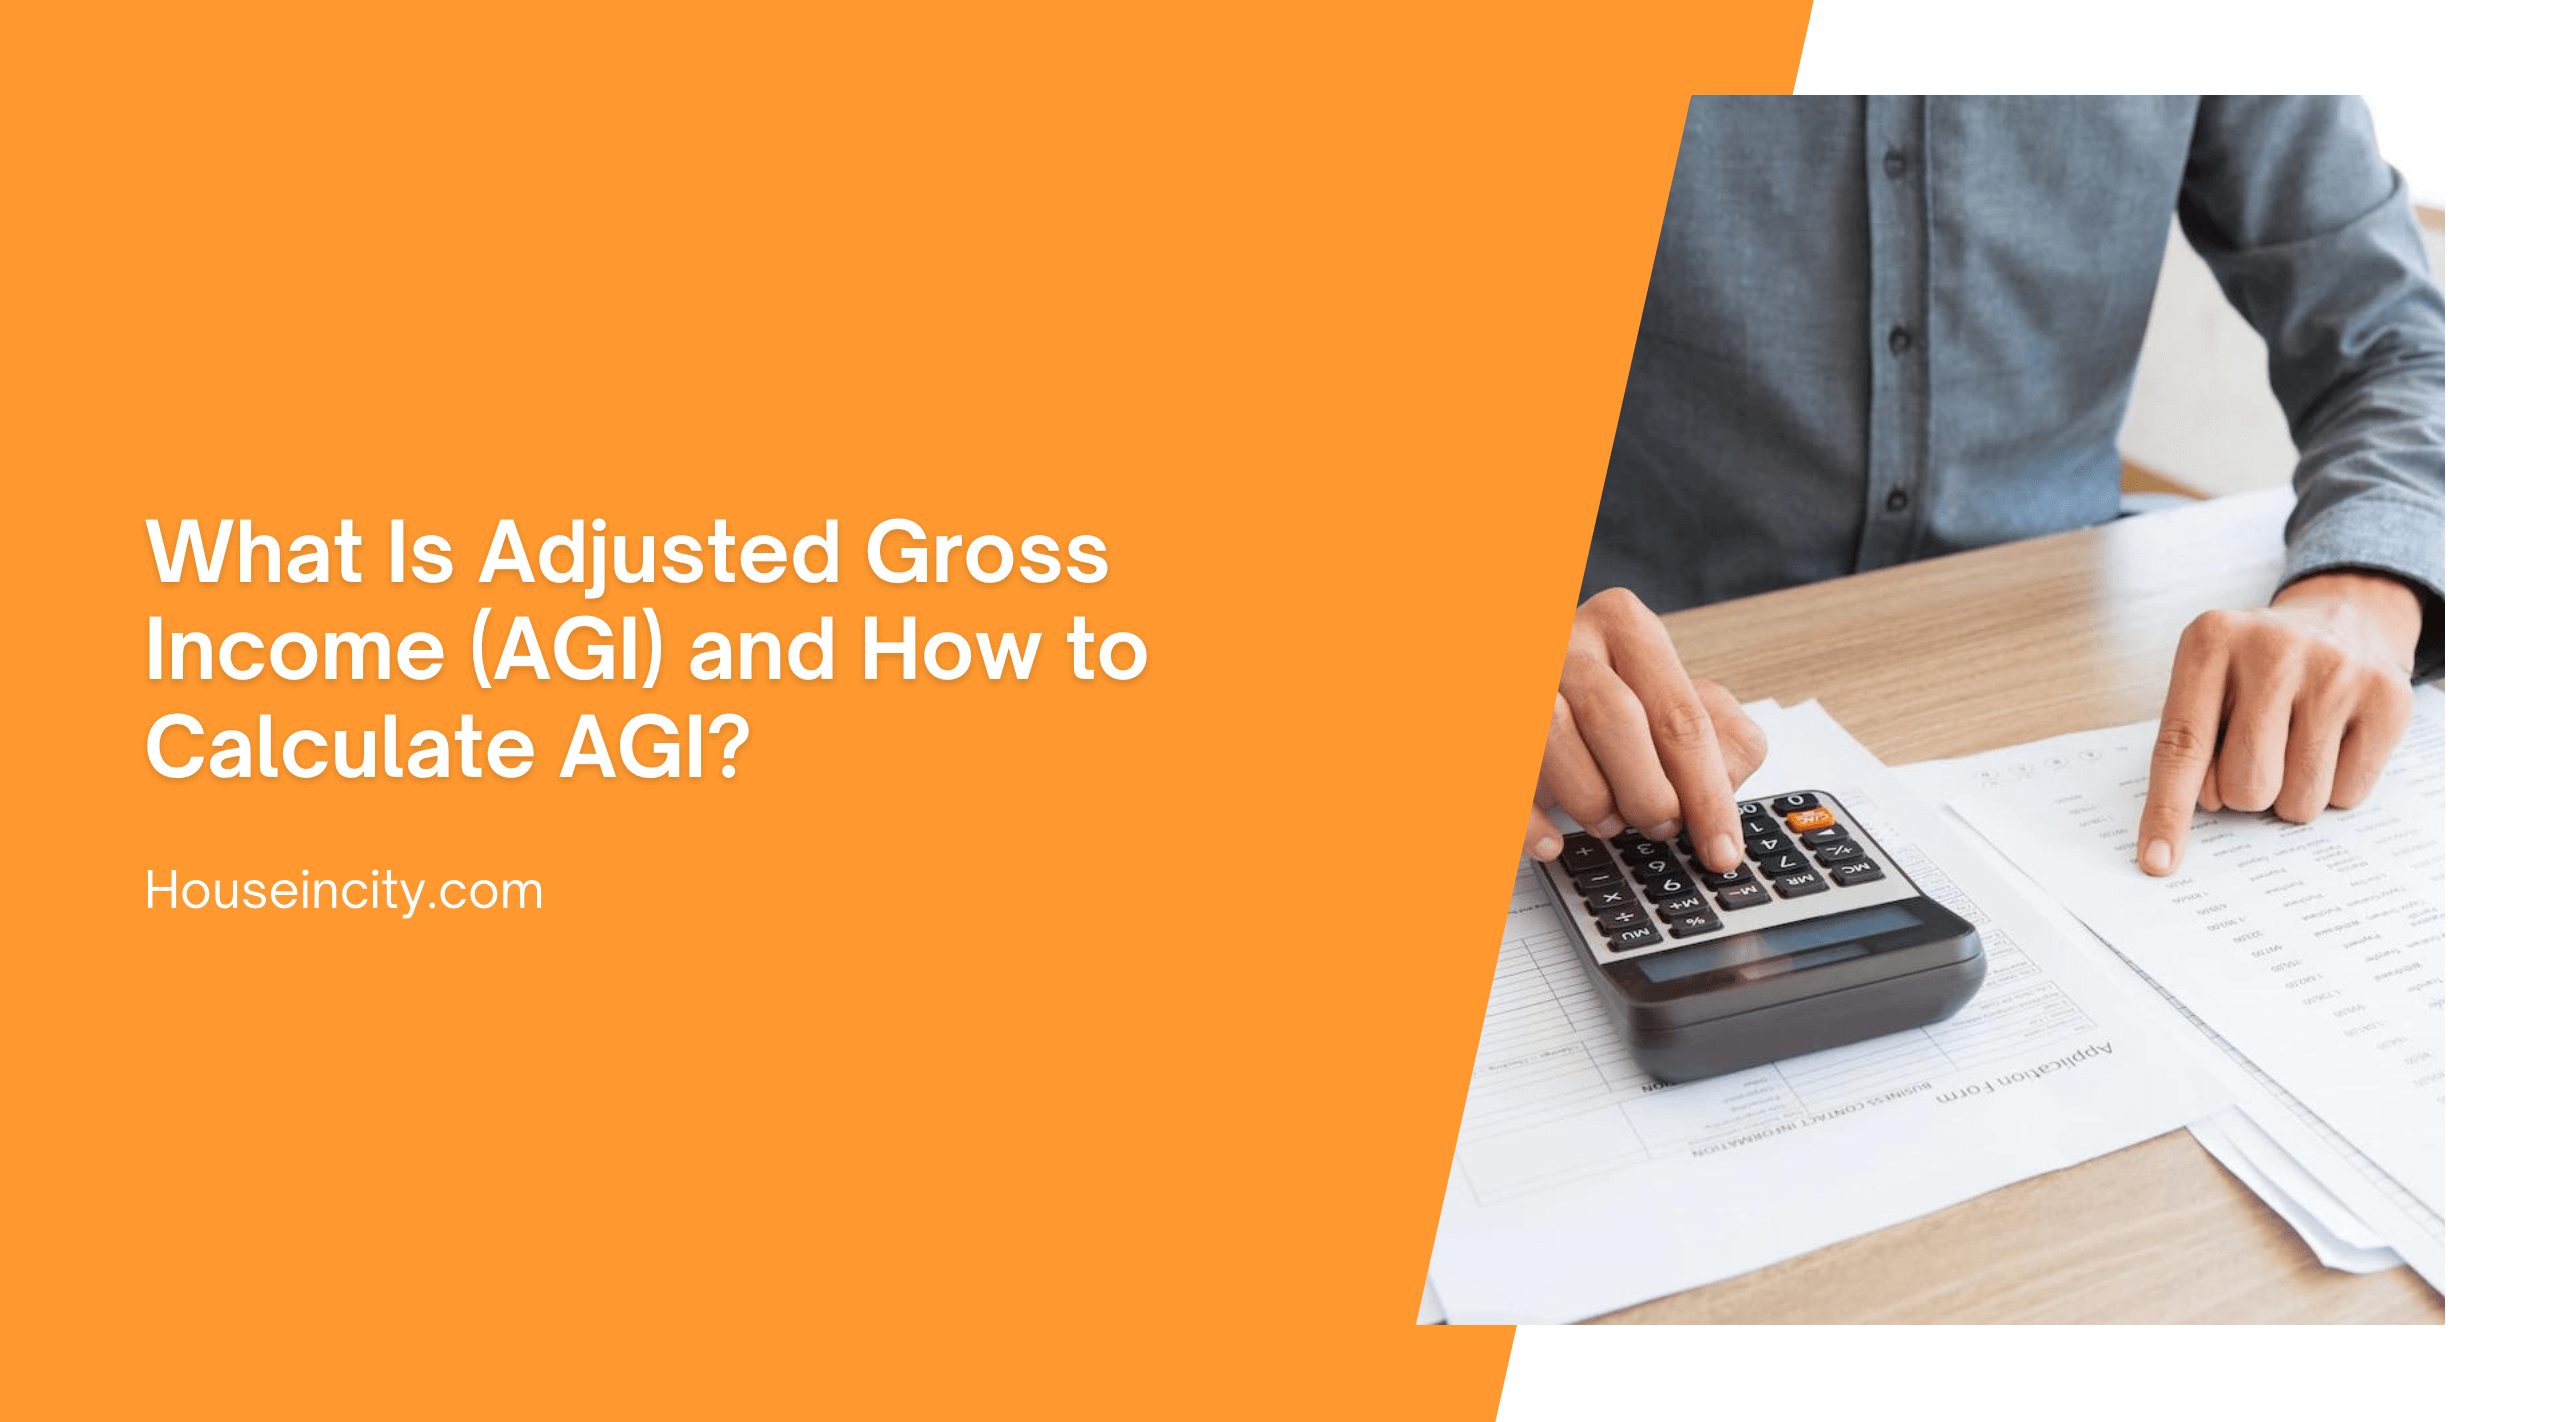 What Is Adjusted Gross Income (AGI) and How to Calculate AGI?